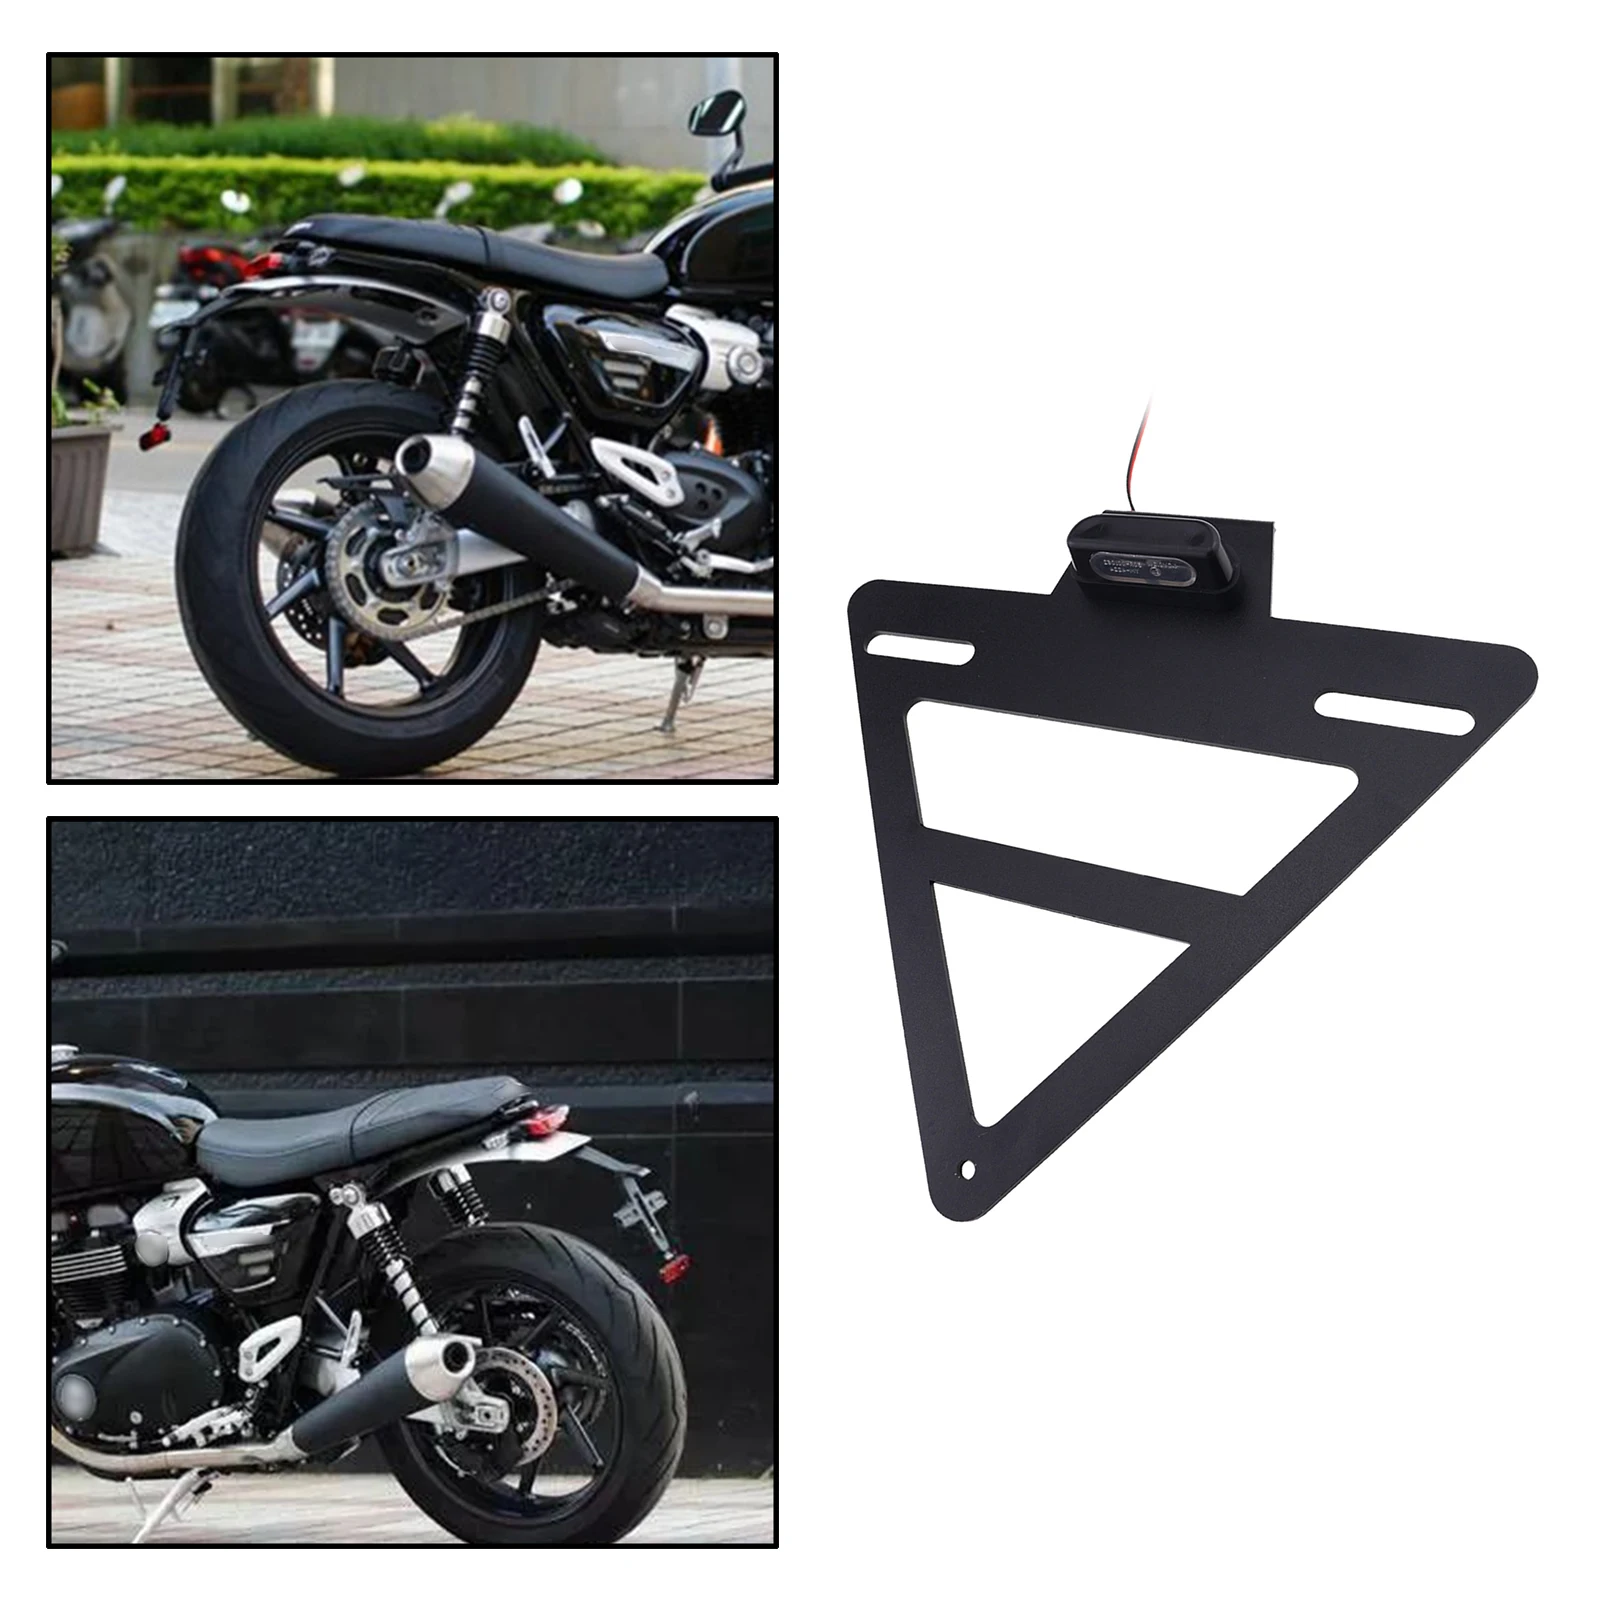 Motorcycle Motorbikes Rear Registration License Plate Holder Mount Accessories Replacement for Thruxton 1200 1200R 19-21